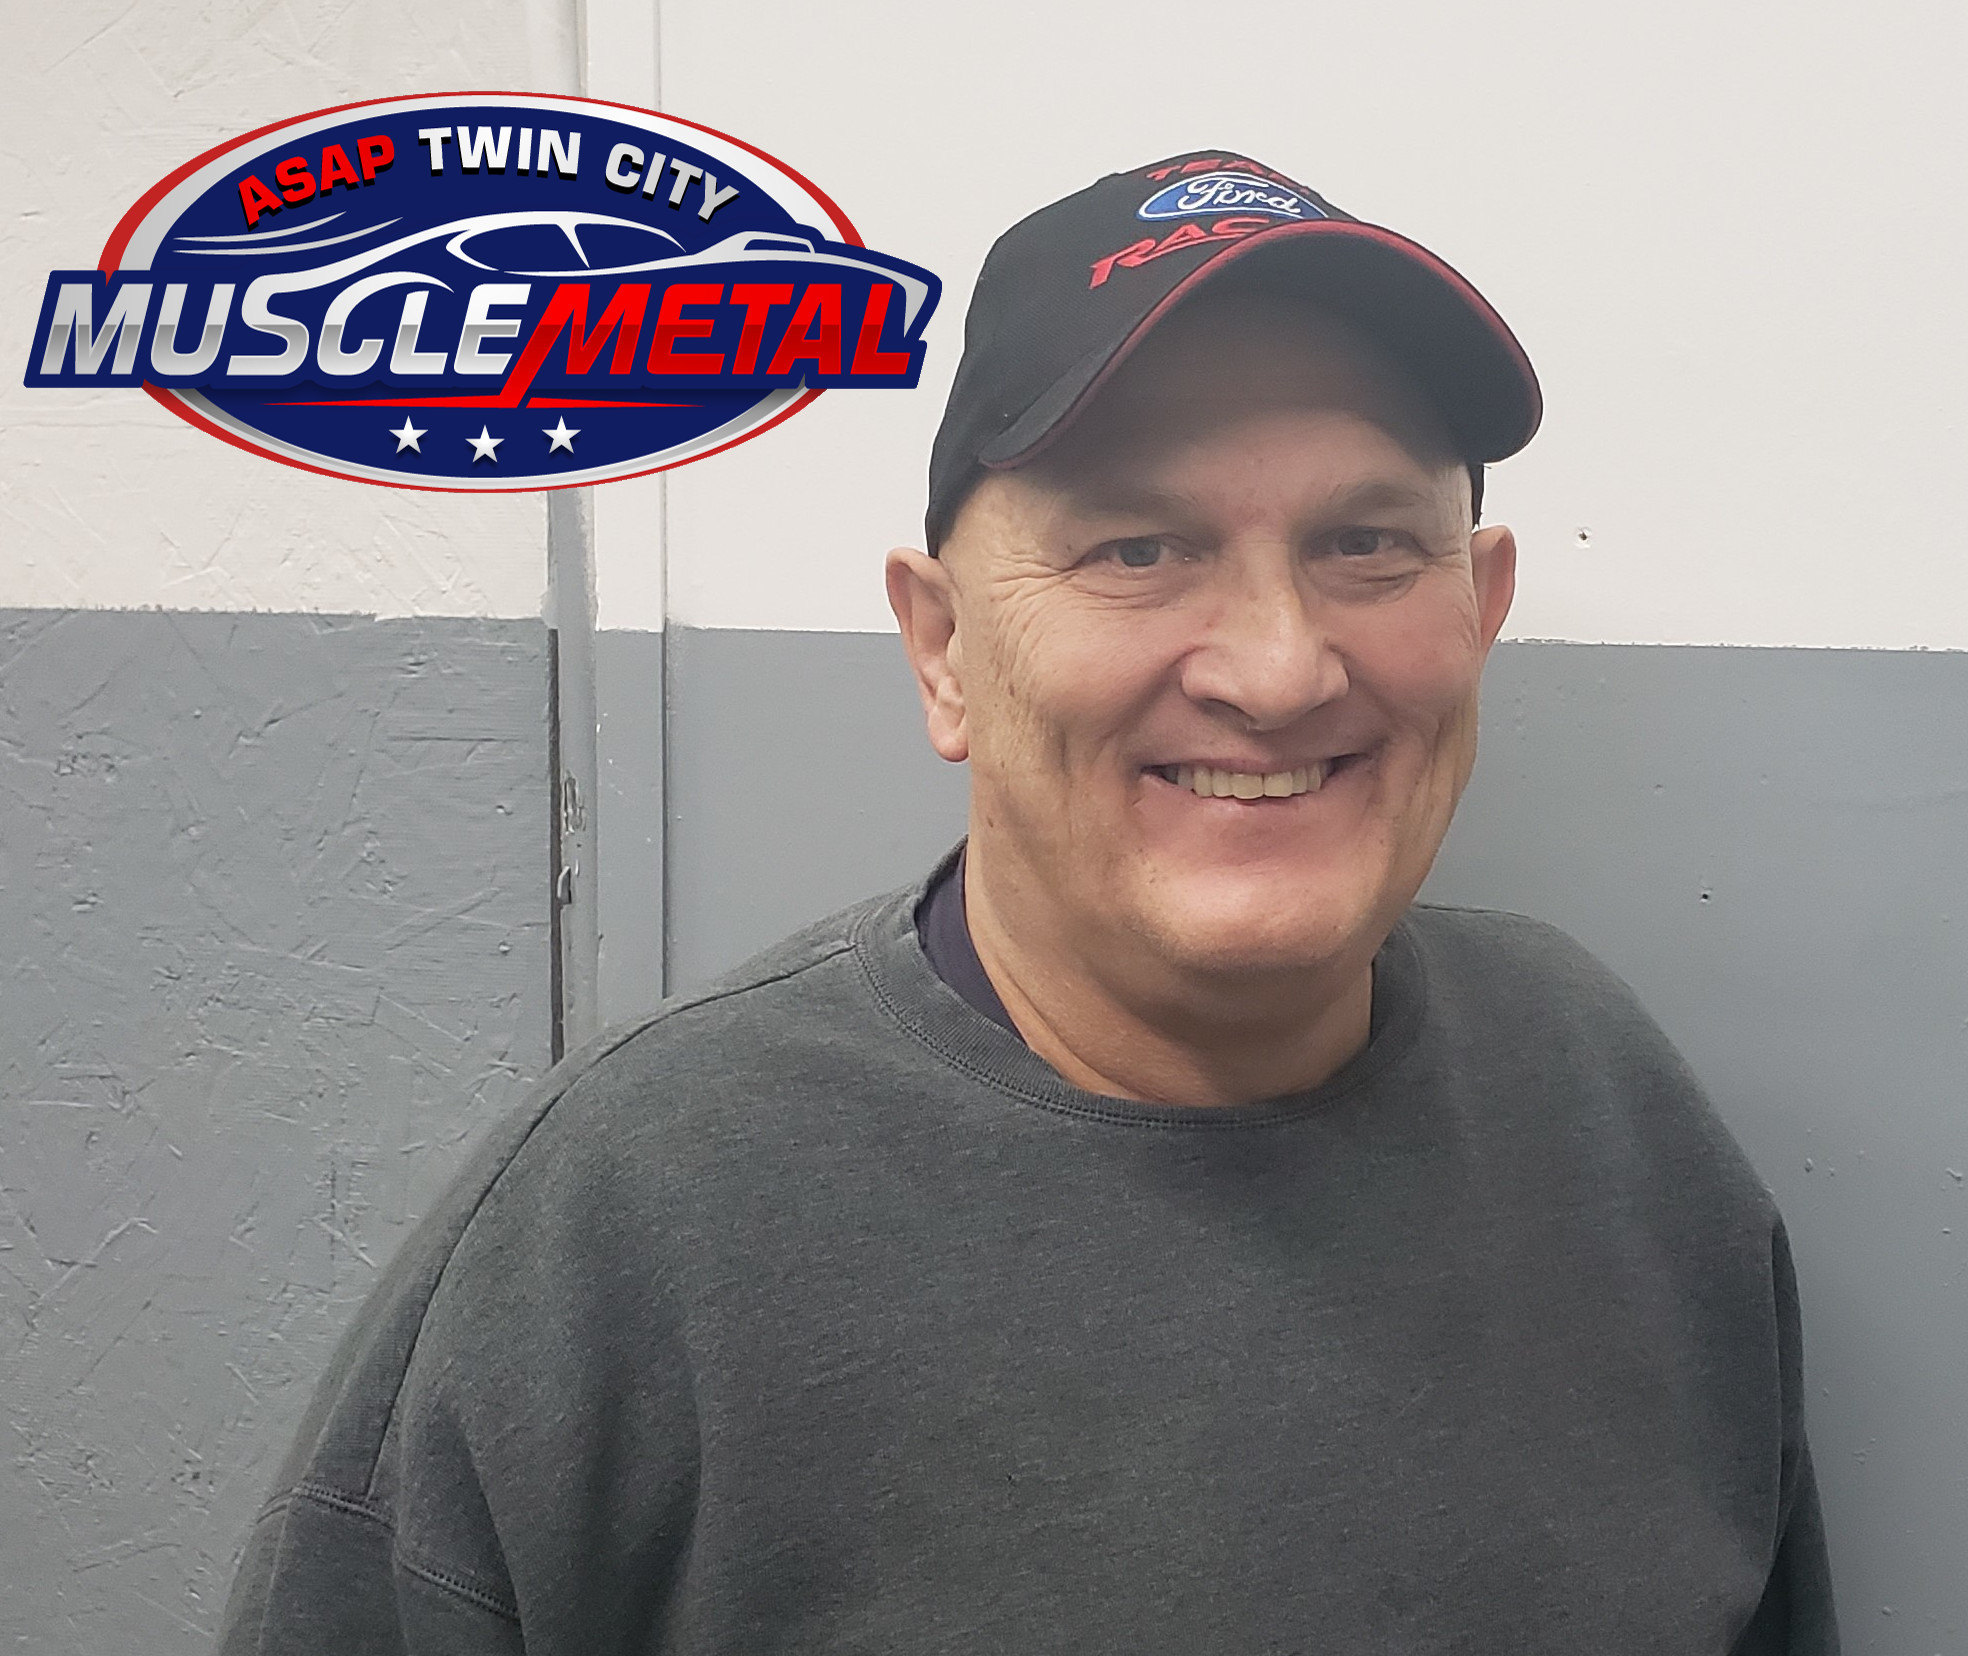 Twin City Muscle Metal Bob Wilson About Photo